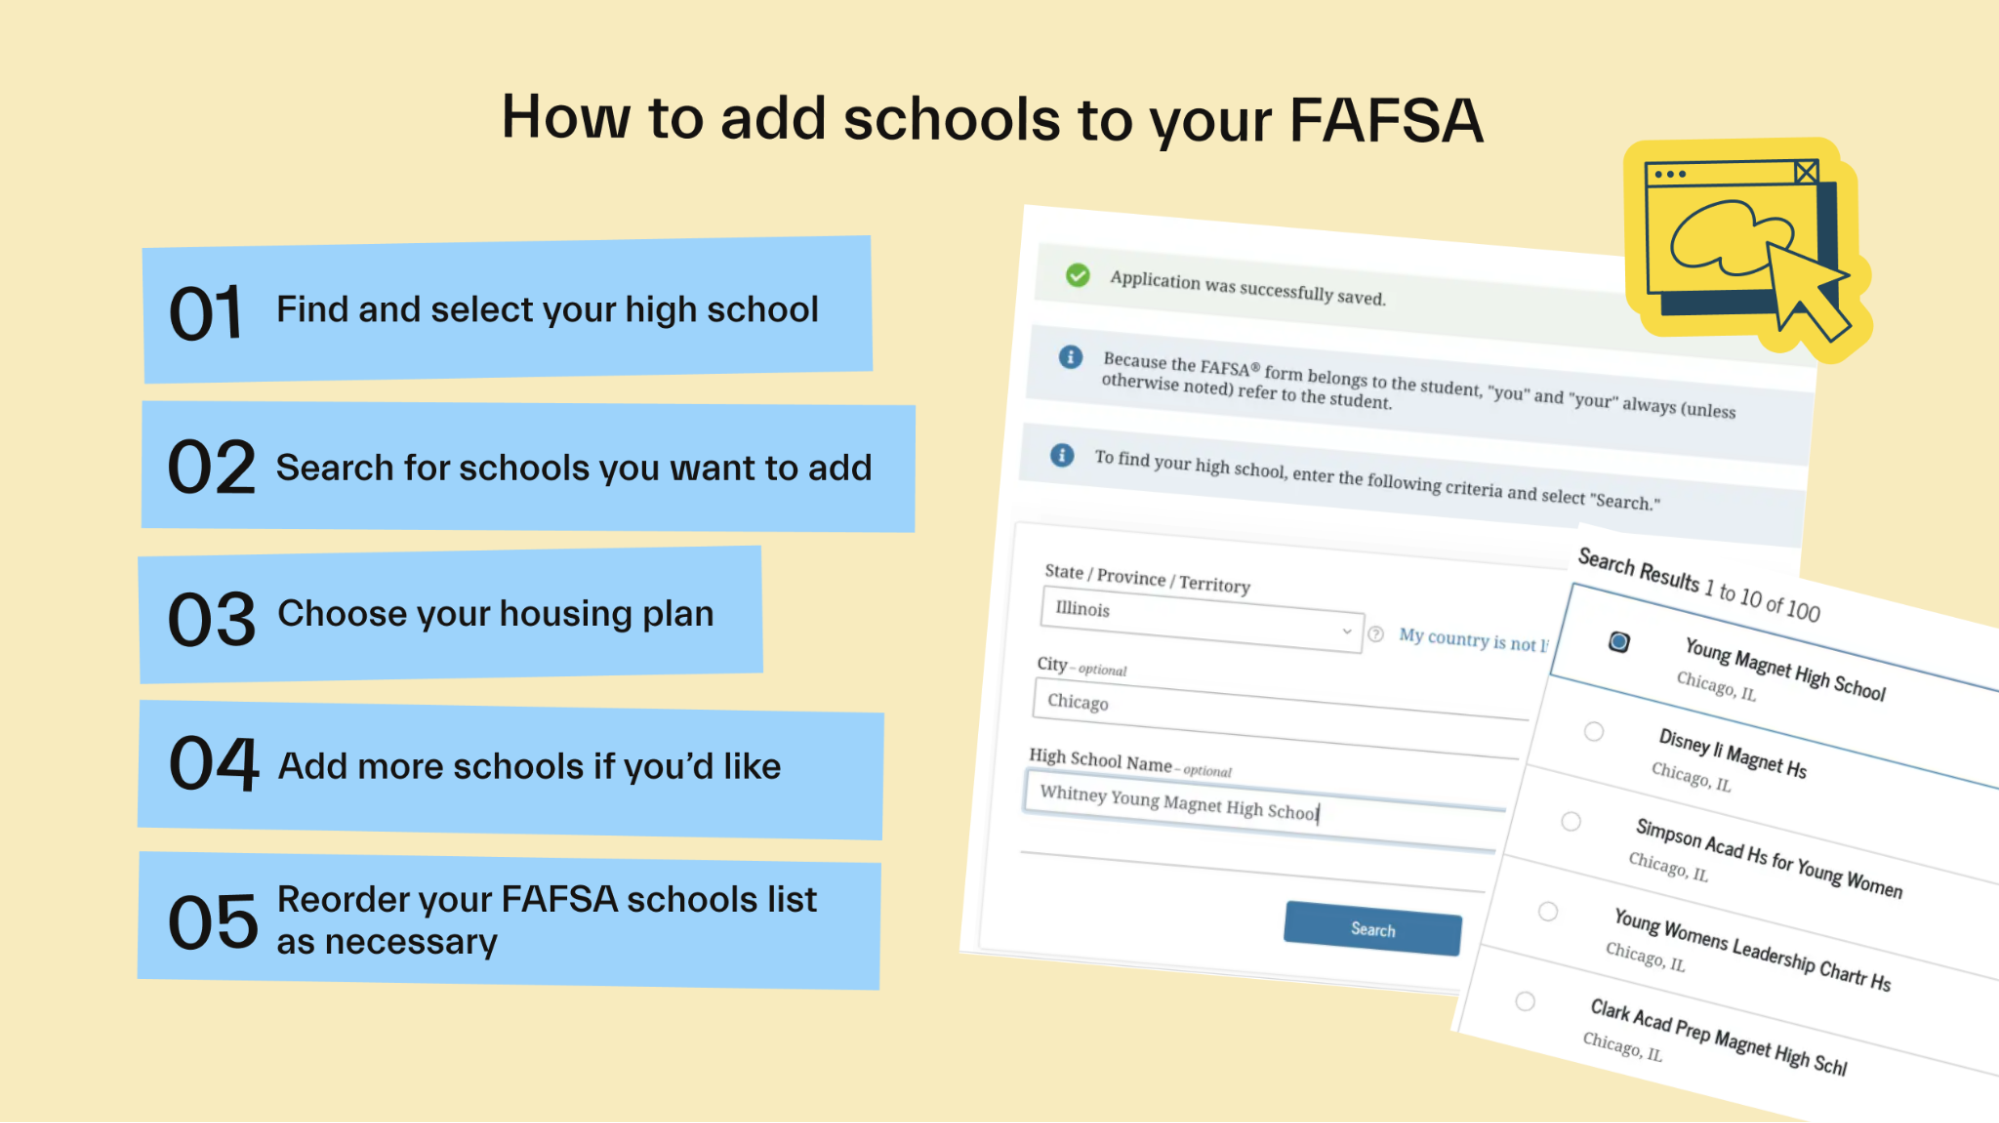 How to add schools to your FAFSA